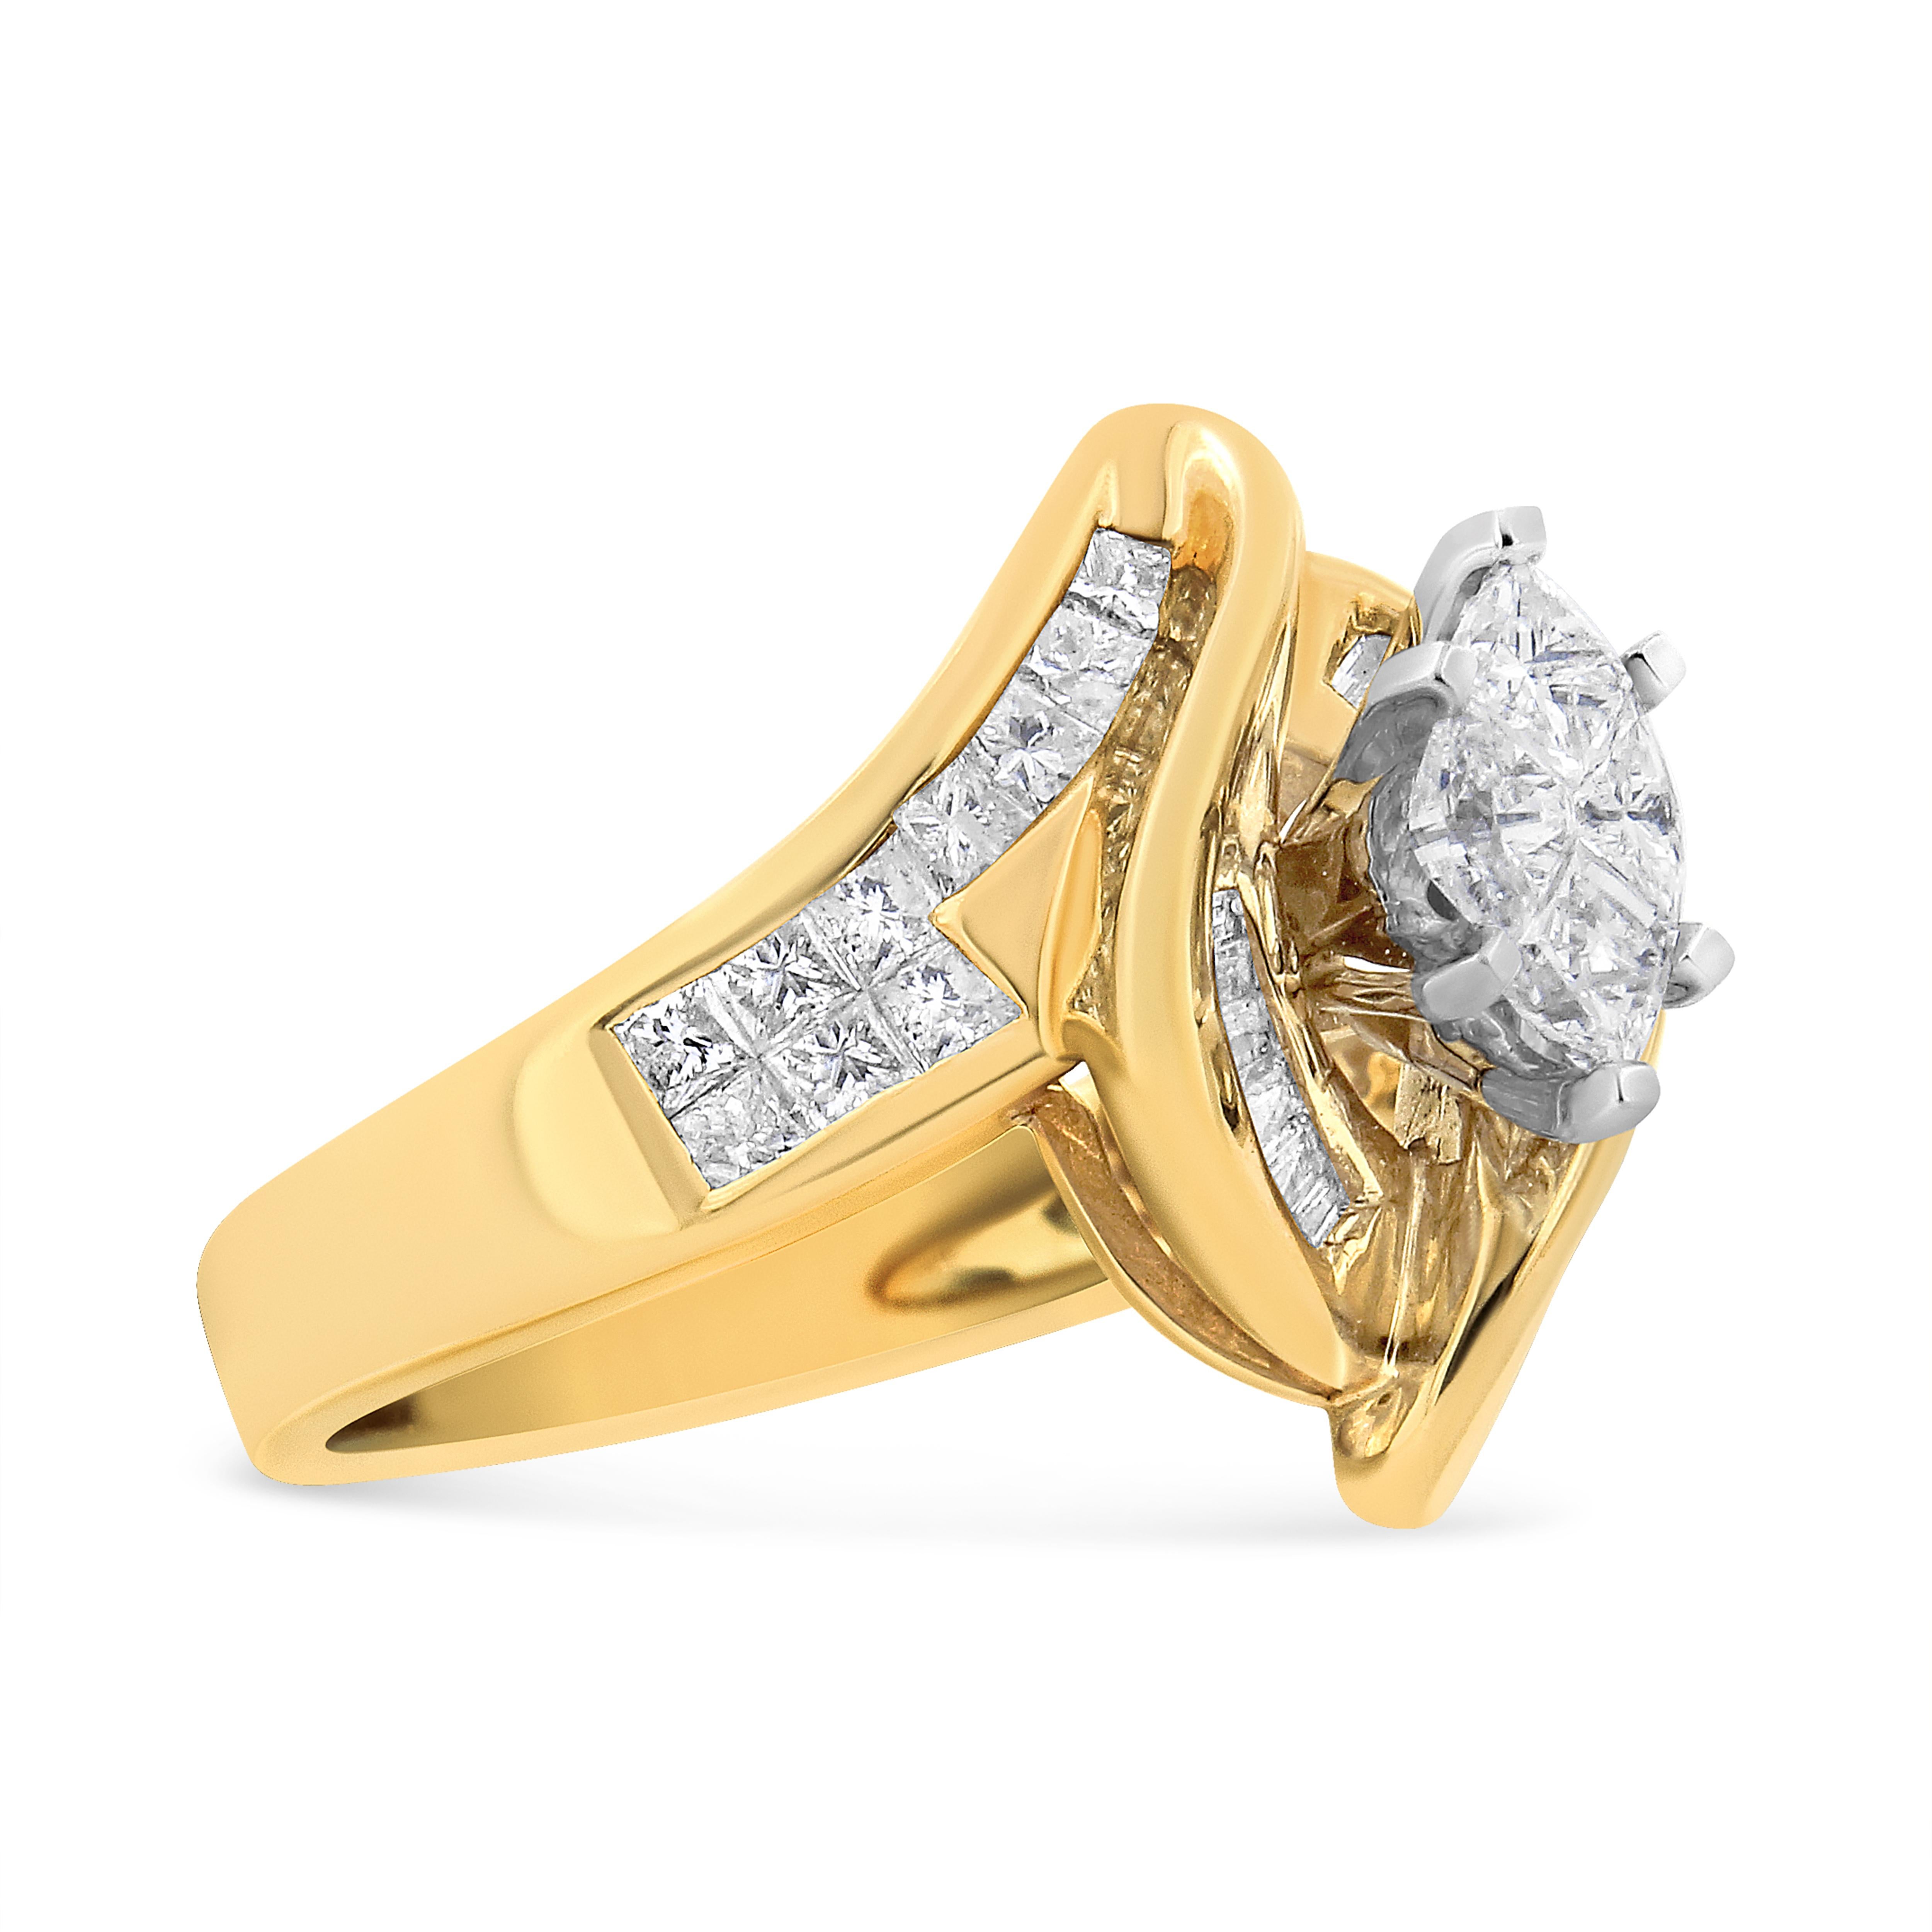 This diamond engagement ring features a central marquise-shaped diamond set within a 14 karat yellow gold band. Baguette and princess cut diamonds along the band add extra sparkle to this elegant design. It has a total diamond weight of 1 1/4